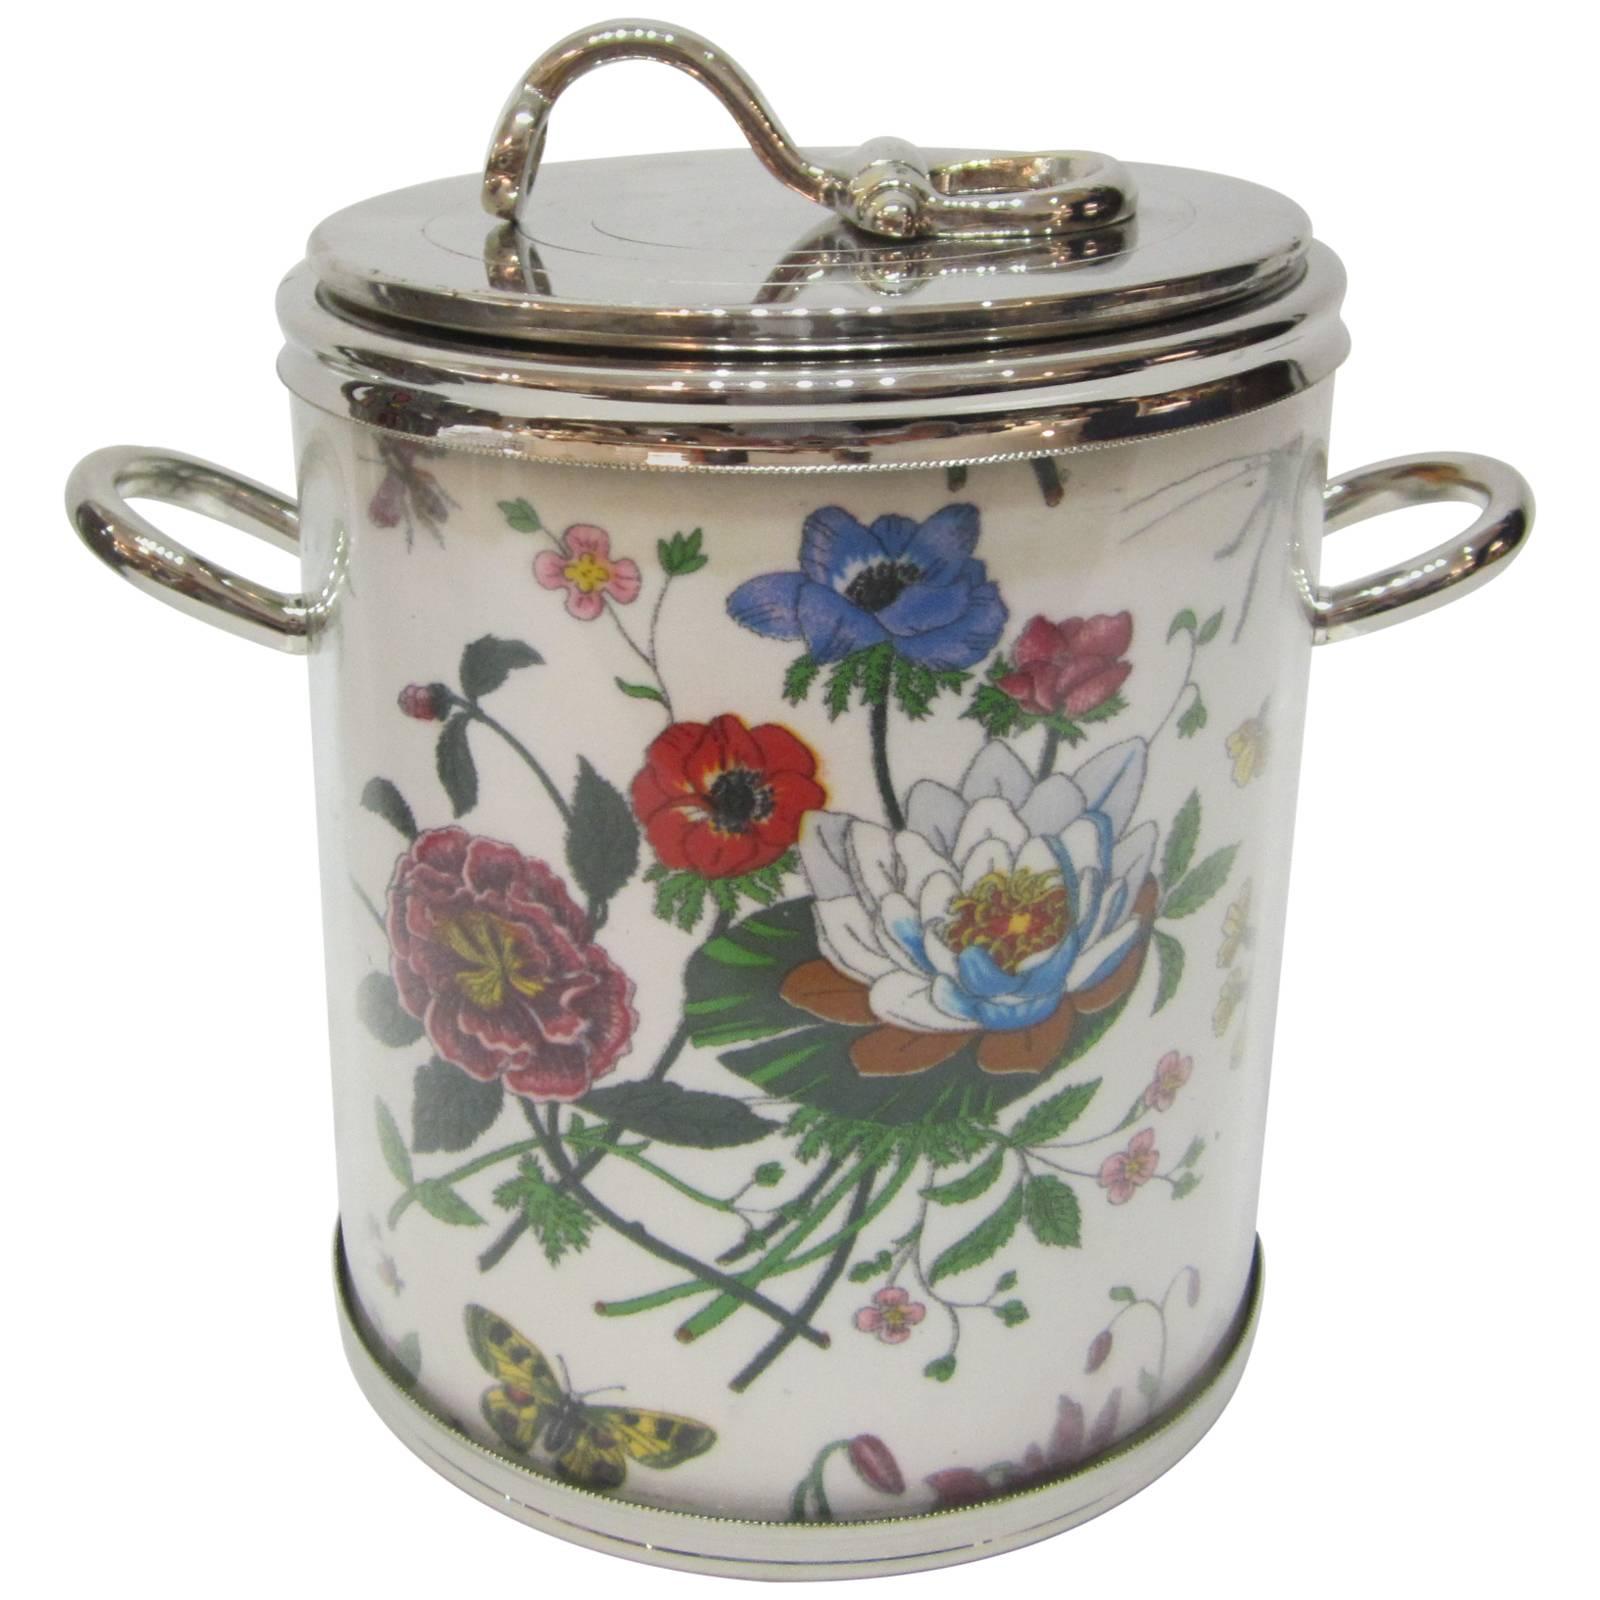 Gucci Vinyl-Covered Floral Print and Nickeled Metal Ice Bucket Signed